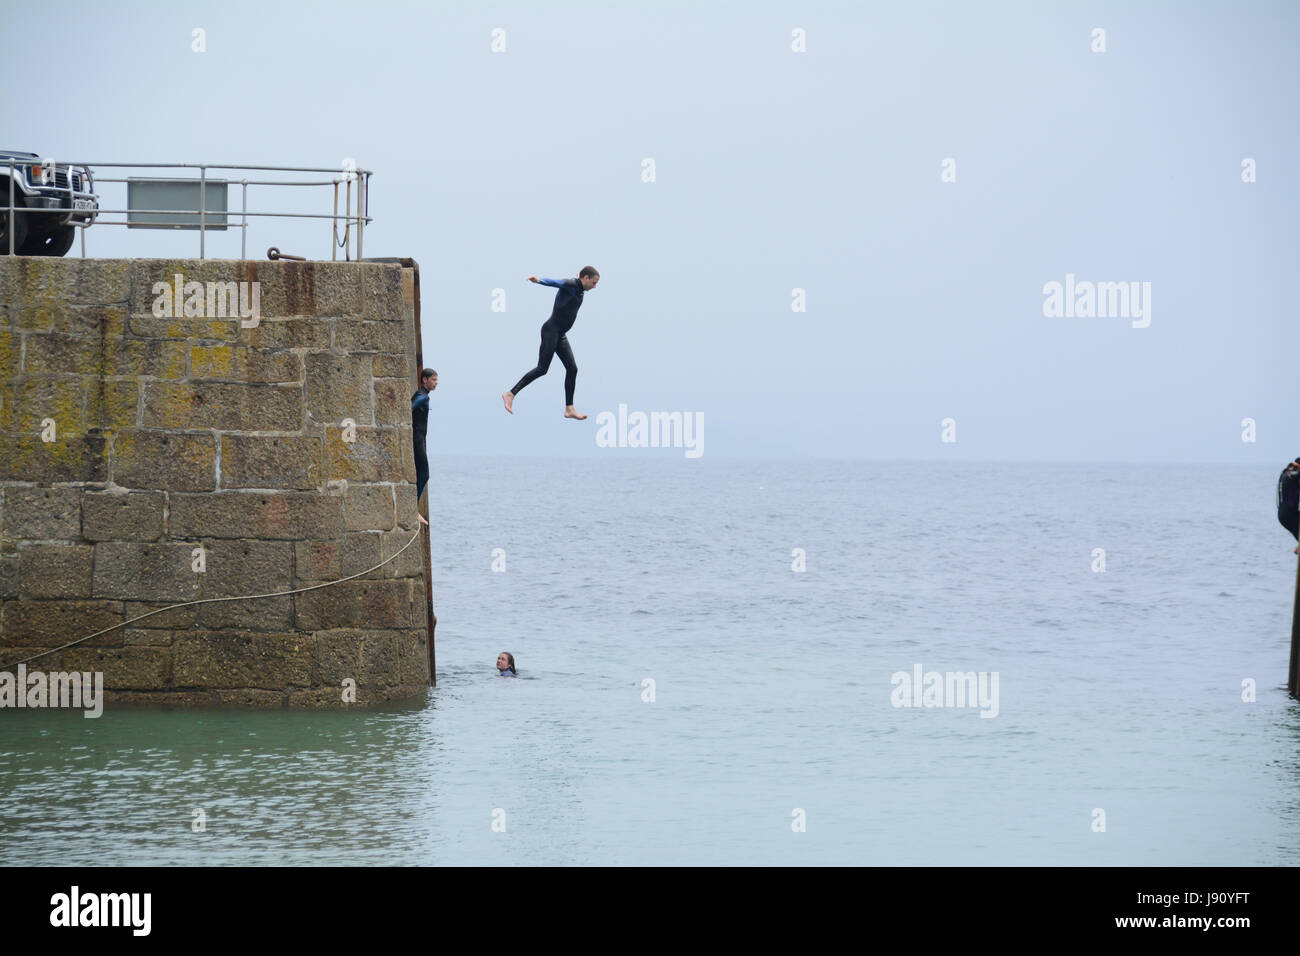 Mousheole Harbour, Cornwall,UK. 31st May 2017. UK Weather. After a misty start to the day, the weather is getting warmer on the Cornish coast, with families enjoying the beach, and people jumping off the harbour wall into the sea. Credit: cwallpix/Alamy Live News Stock Photo